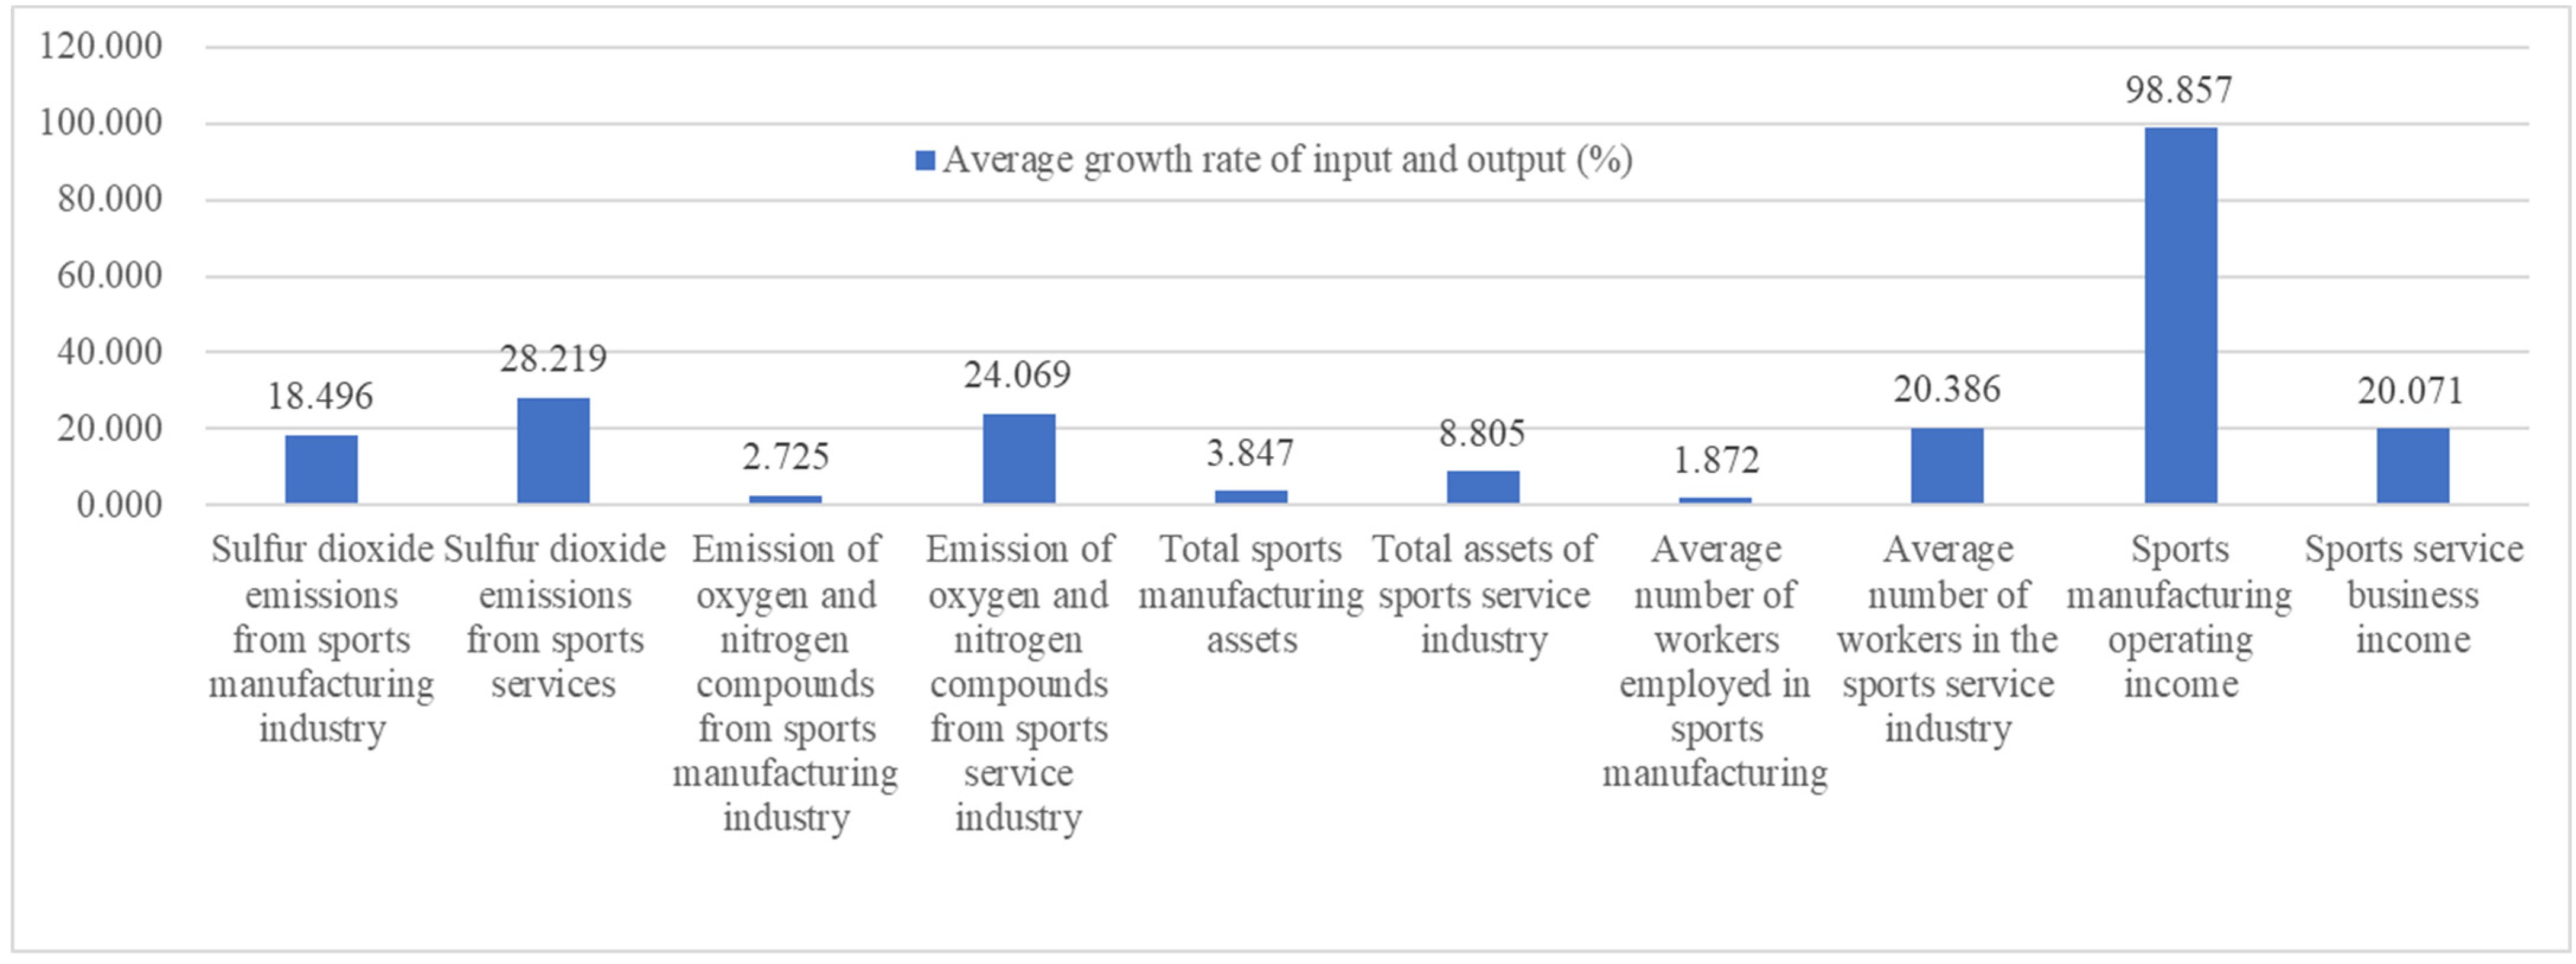 Sustainability | Free Full-Text | Empirical Study on the Green  Transformation of the Sports Industry Empowered by New Infrastructure from  the Perspective of the Green Total Factor Productivity of the Sports  Industry